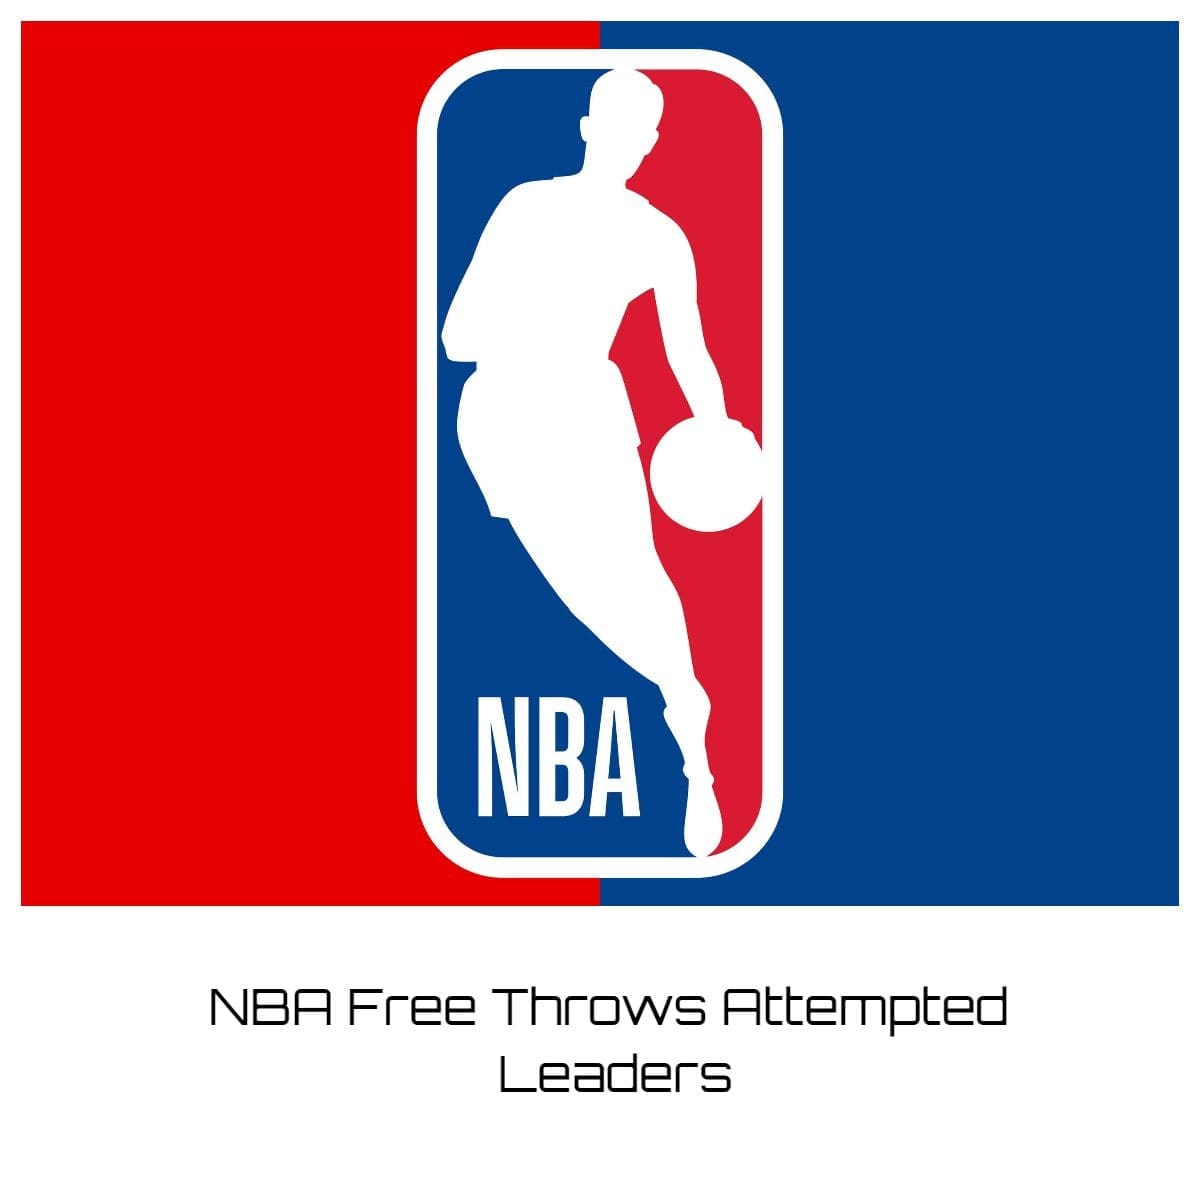 NBA Free Throws Attempted Leaders